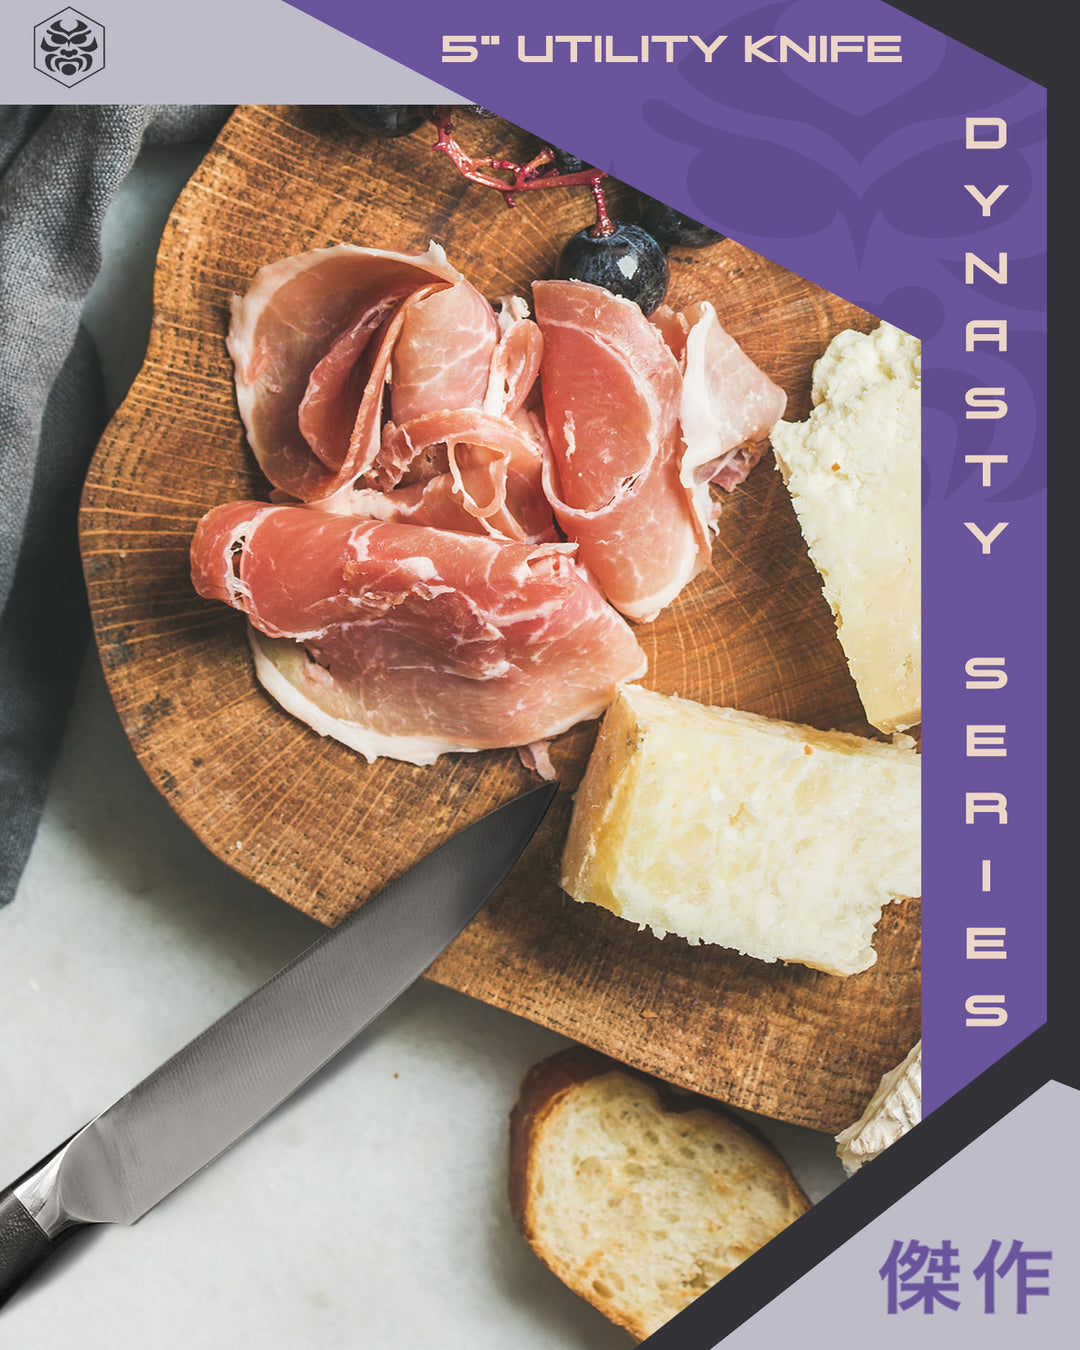 The Dynasty Utility Knife with sliced wedges of cheese, cured meat, and bread, as well as grapes